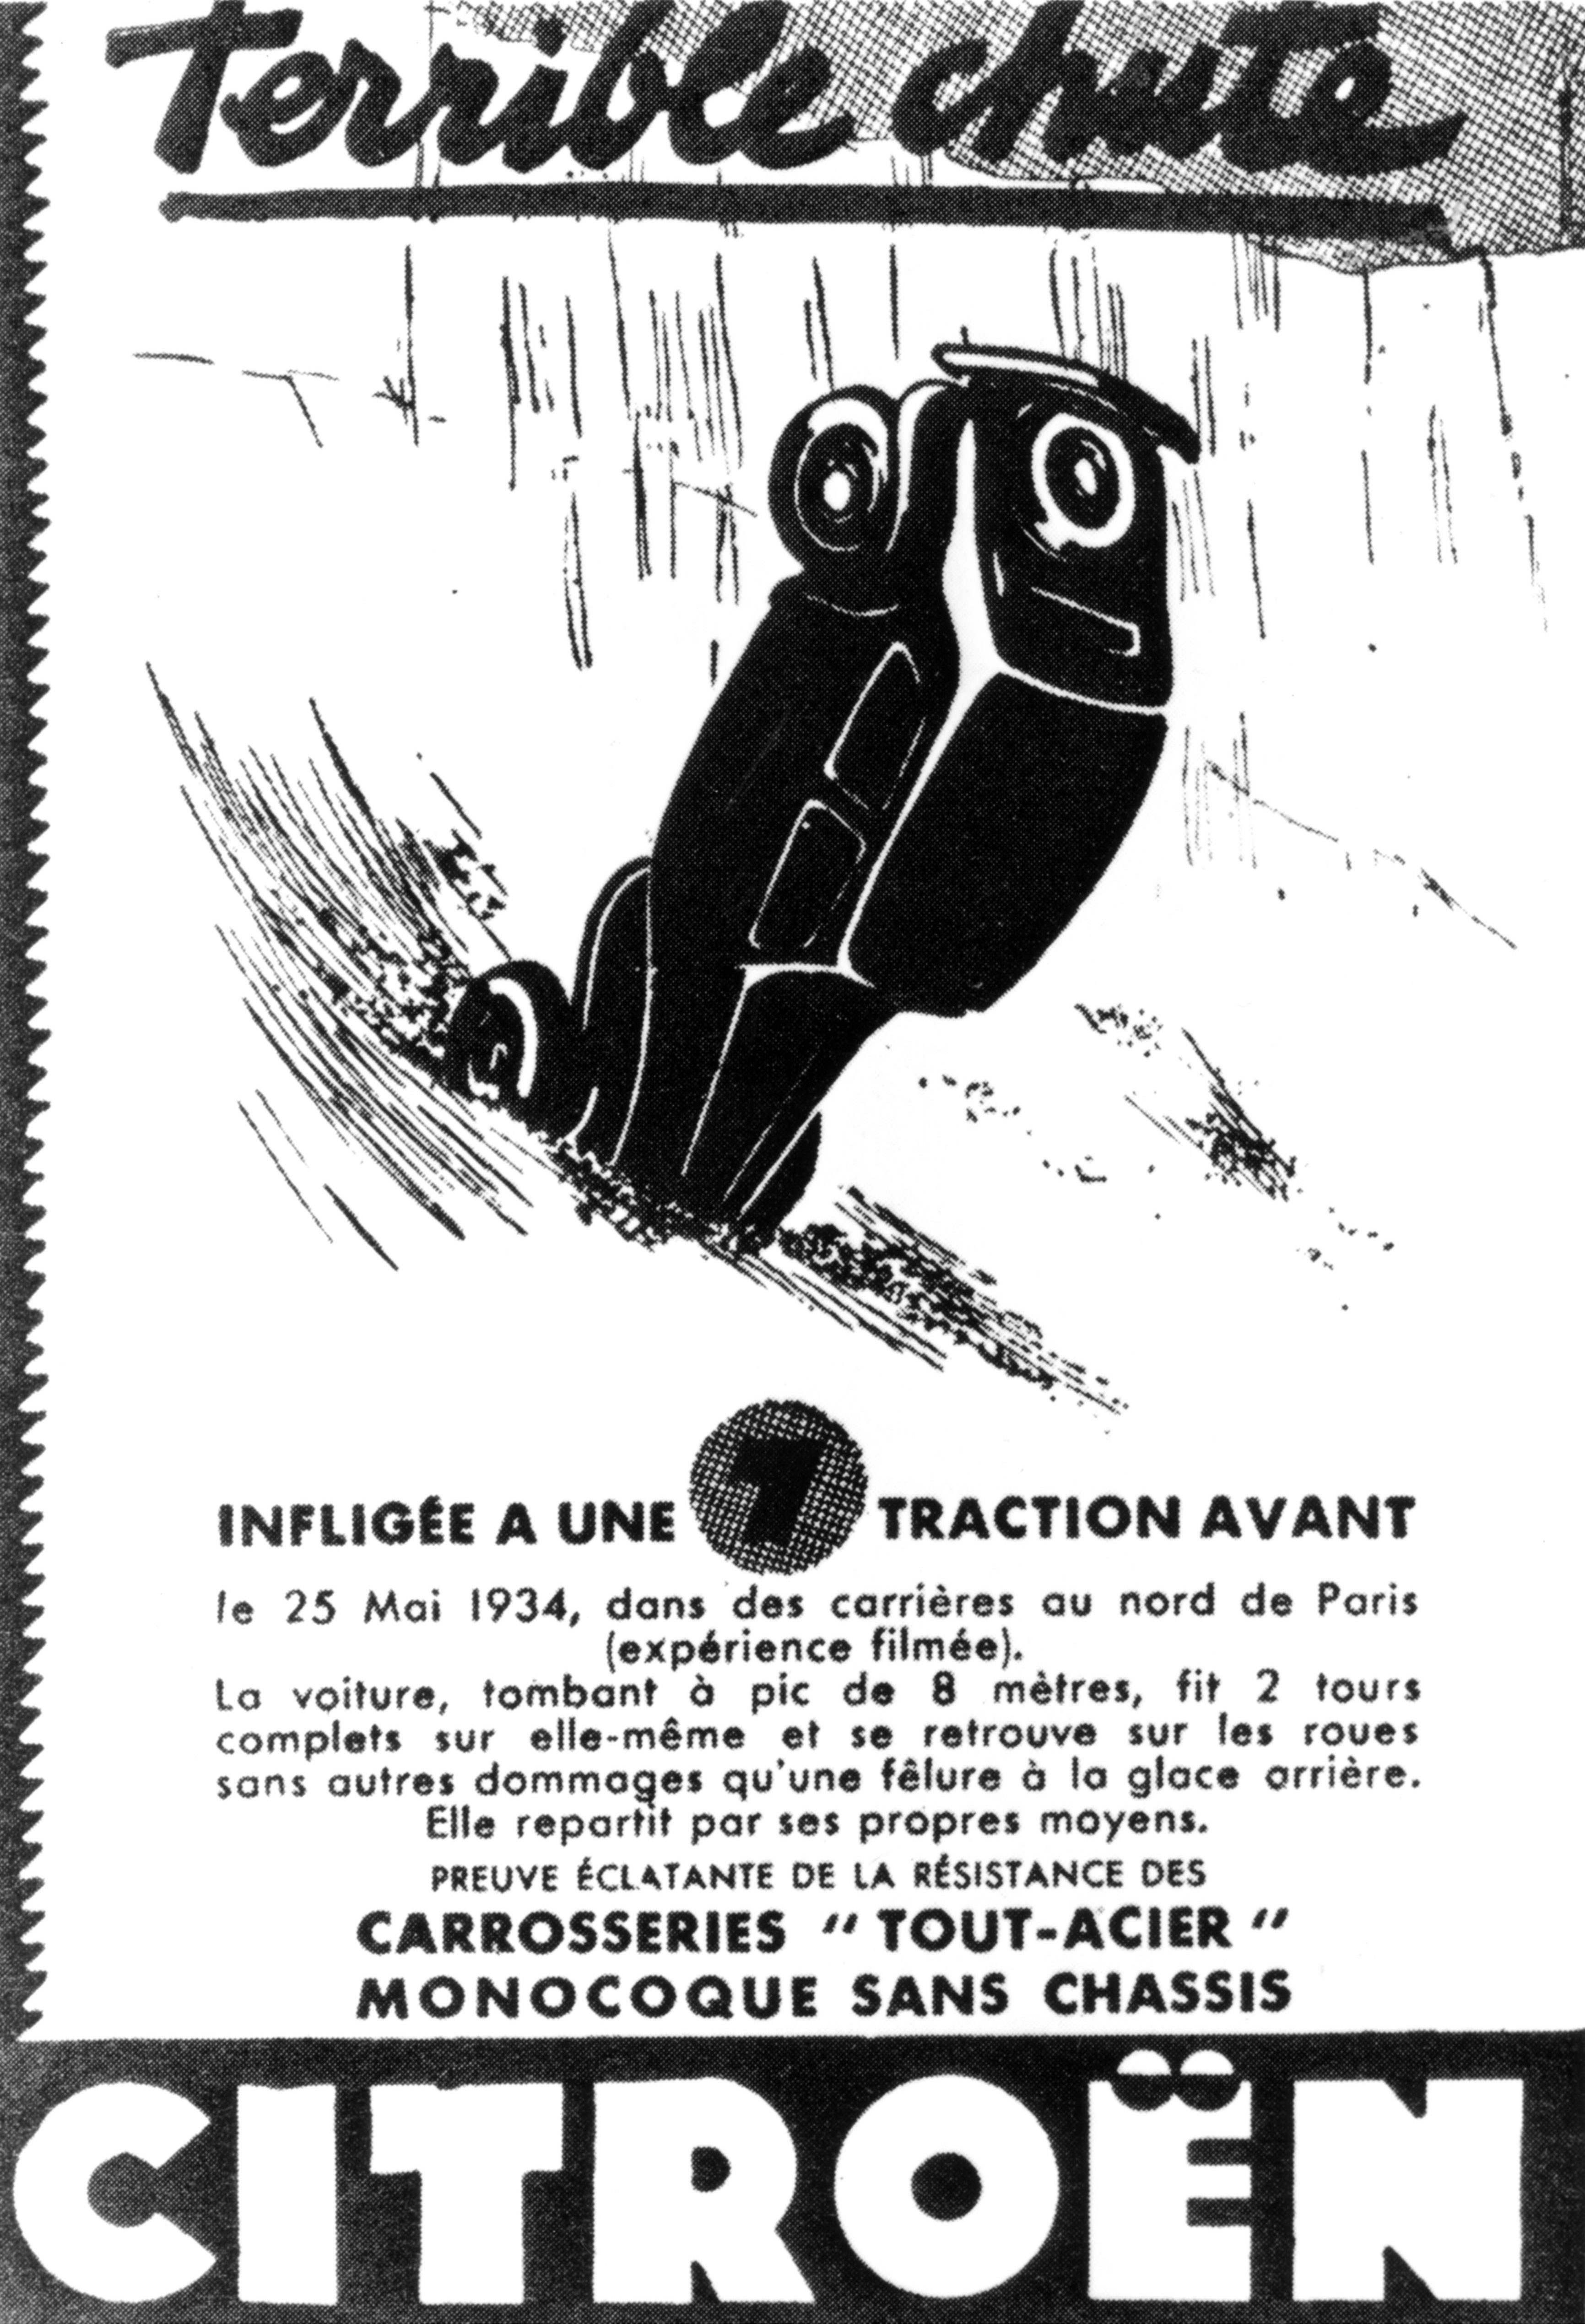 Ten brilliant Citroën car adverts from its first 100 years Citroën 7CV Traction Avant "terrible fall" crash test poster